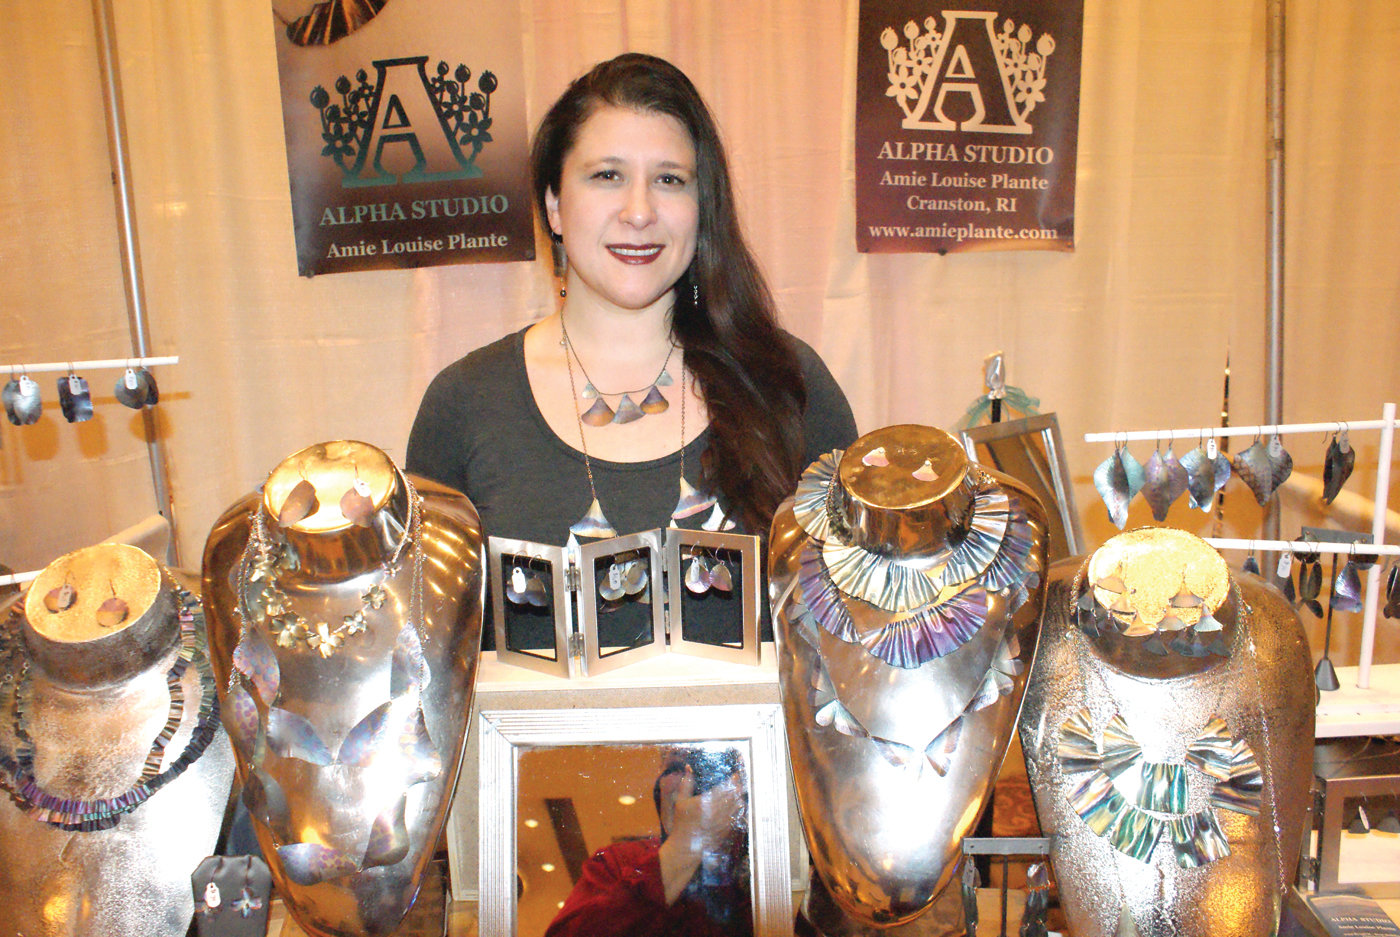 UNIQUE JEWLERY: At her display booth during the Rhode Island Women’s Expo at the Crowne Plaza was Annie Louise Plante, Owner and Designer of fine art jewelry, Alpha Studio located in Cranston.